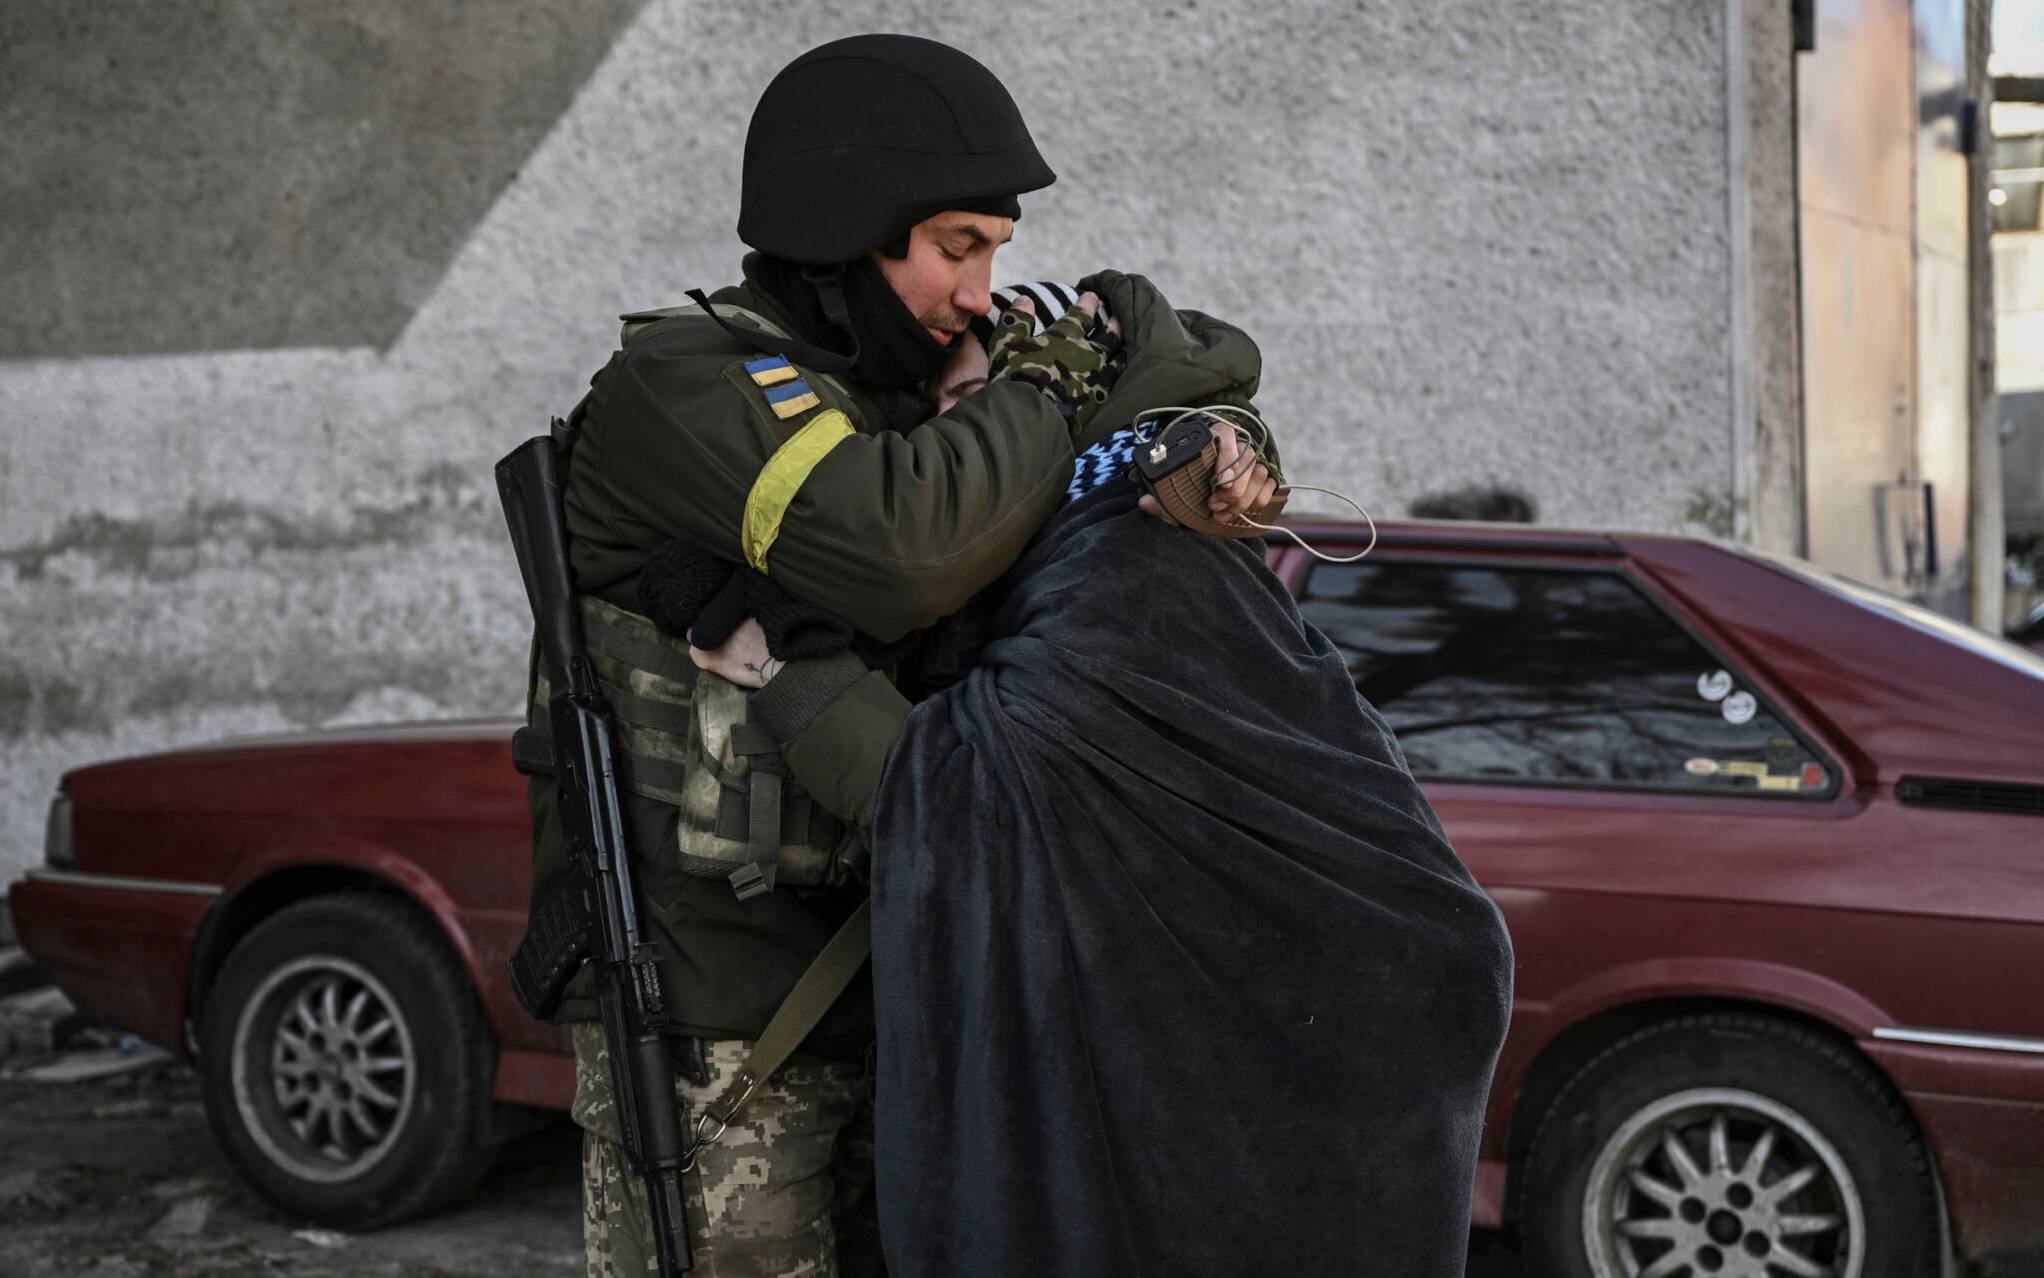 A Ukranian soldier hugs his wife in the city of Irpin, north of Kyiv, on March 10, 2022. - Russian forces on March 10, 2022 rolled their armoured vehicles up to the northeastern edge of Kyiv, edging closer in their attempts to encircle the Ukrainian capital. Kyiv's northwest suburbs such as Irpin and Bucha have been enduring shellfire and bombardments for more than a week, prompting a mass evacuation effort. (Photo by Aris Messinis / AFP)